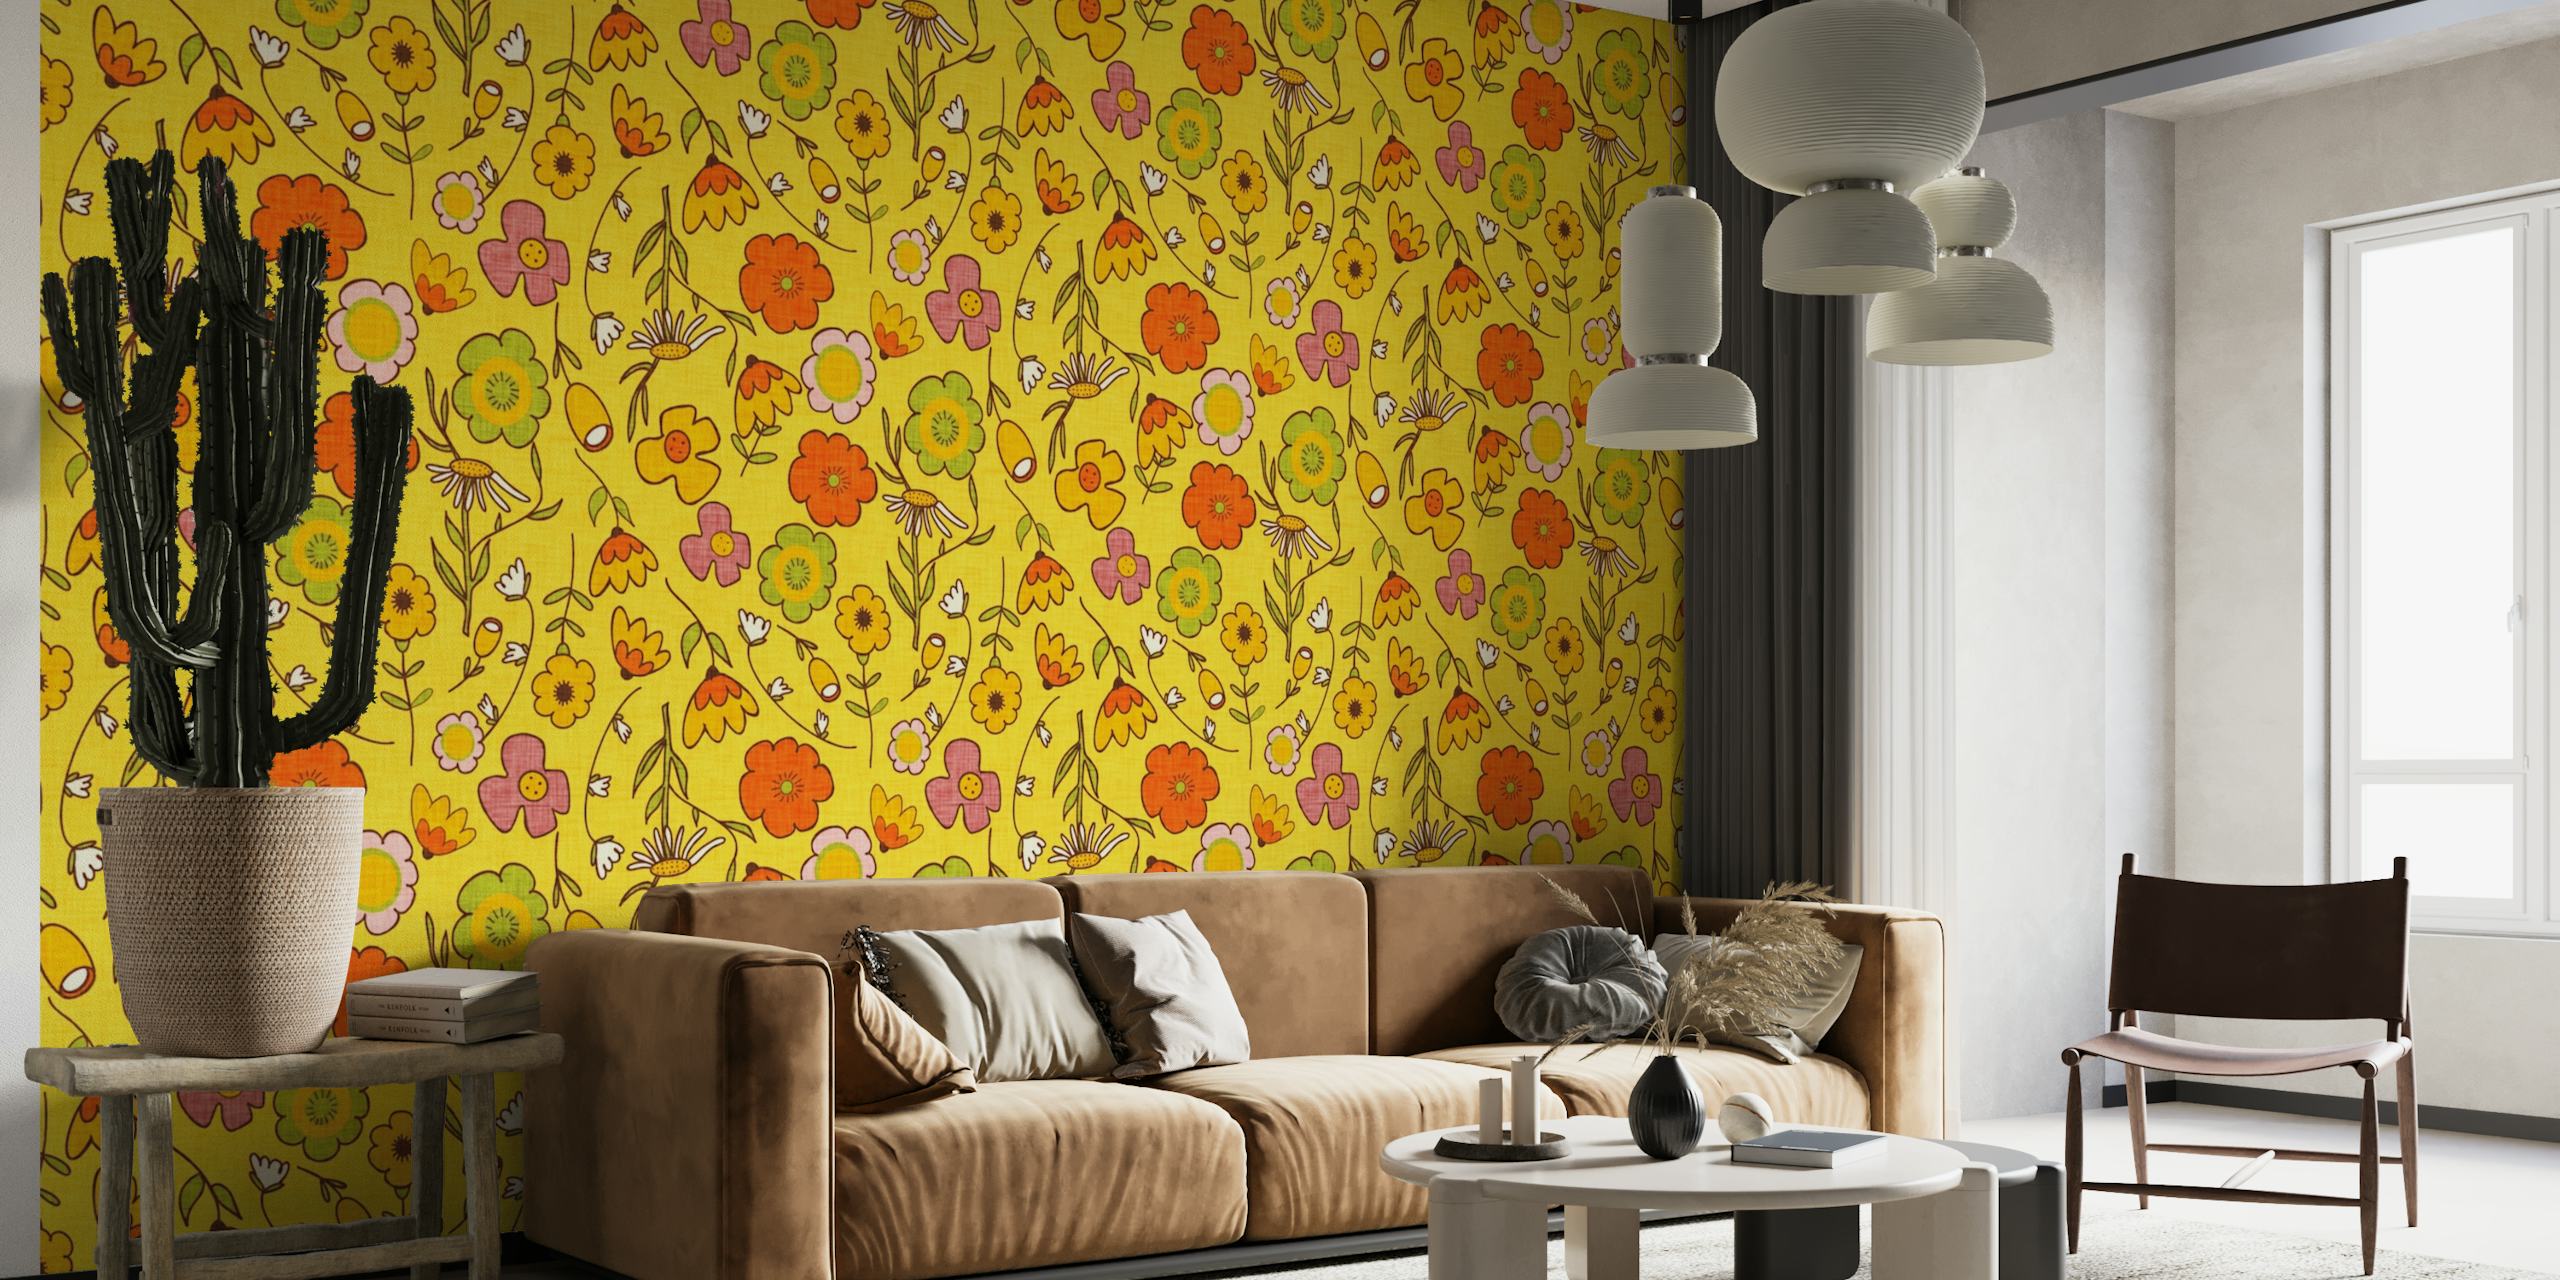 Retro style 70s Floral Bouquet Yellow wall mural with vibrant yellow flowers and greenery on a warm background.